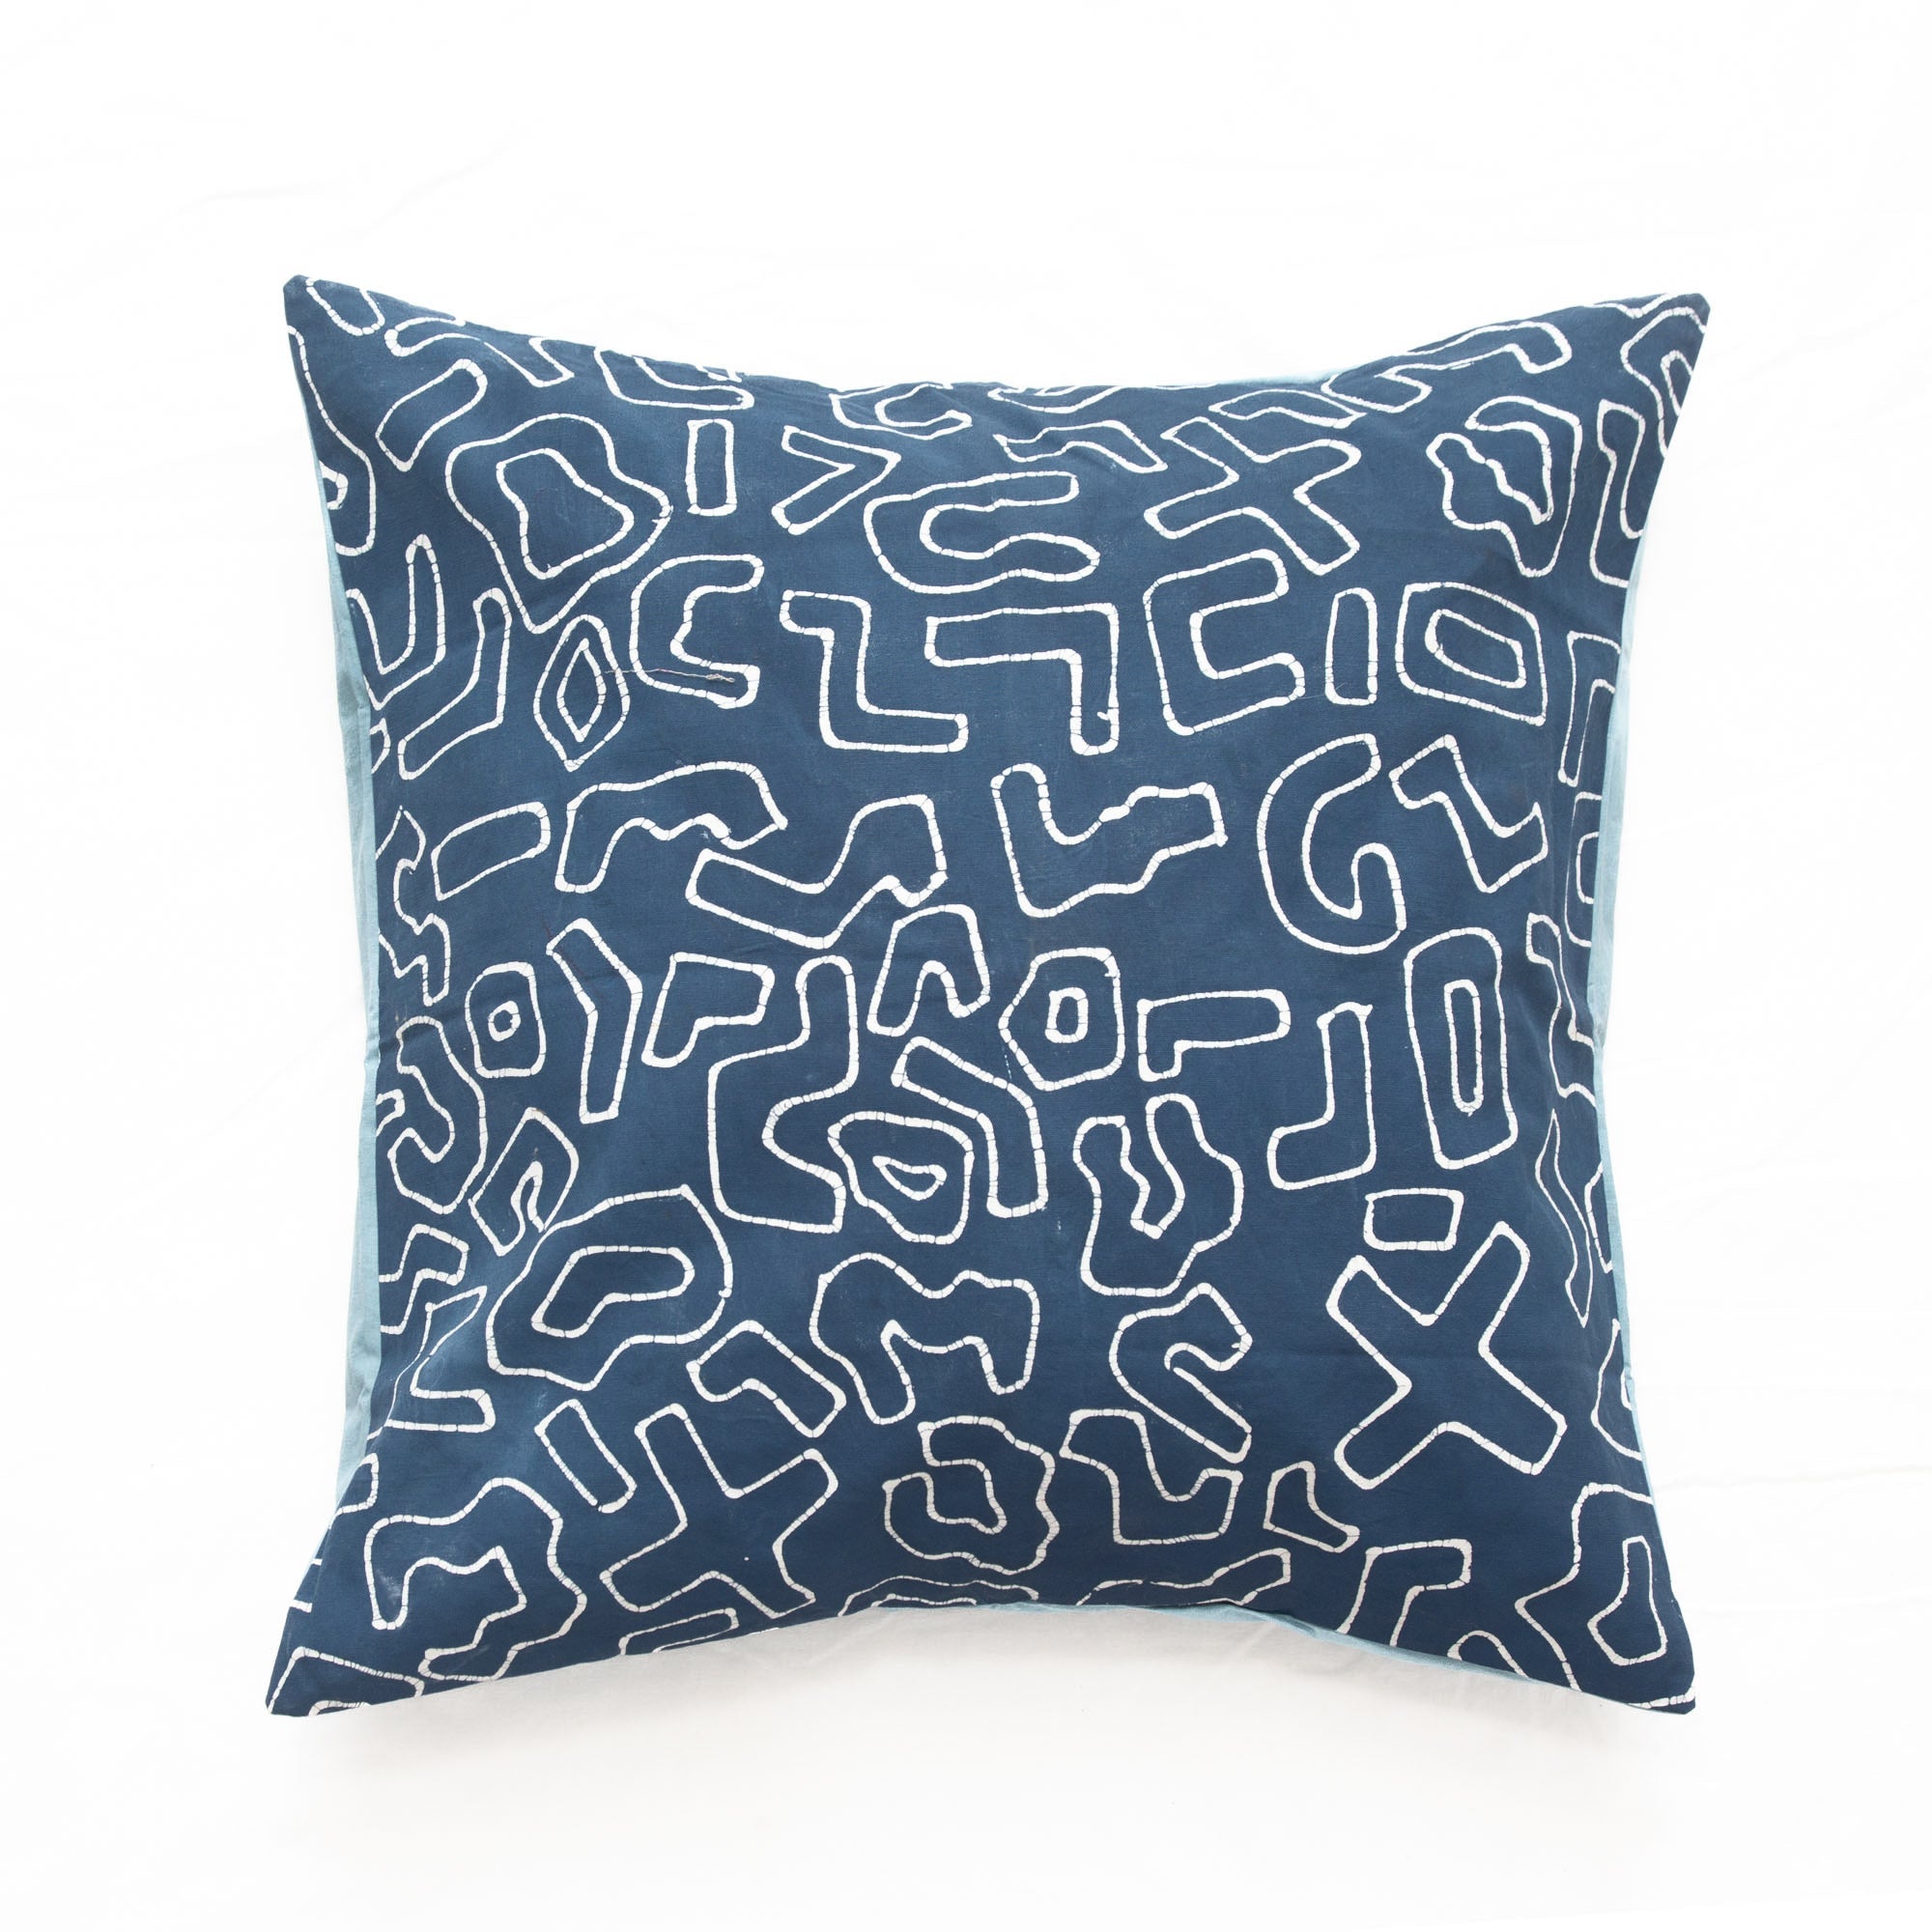 Kuba Blues Outline Indigo Cushion Cover - Handmade by TRIBAL TEXTILES - Handcrafted Home Decor Interiors - African Made